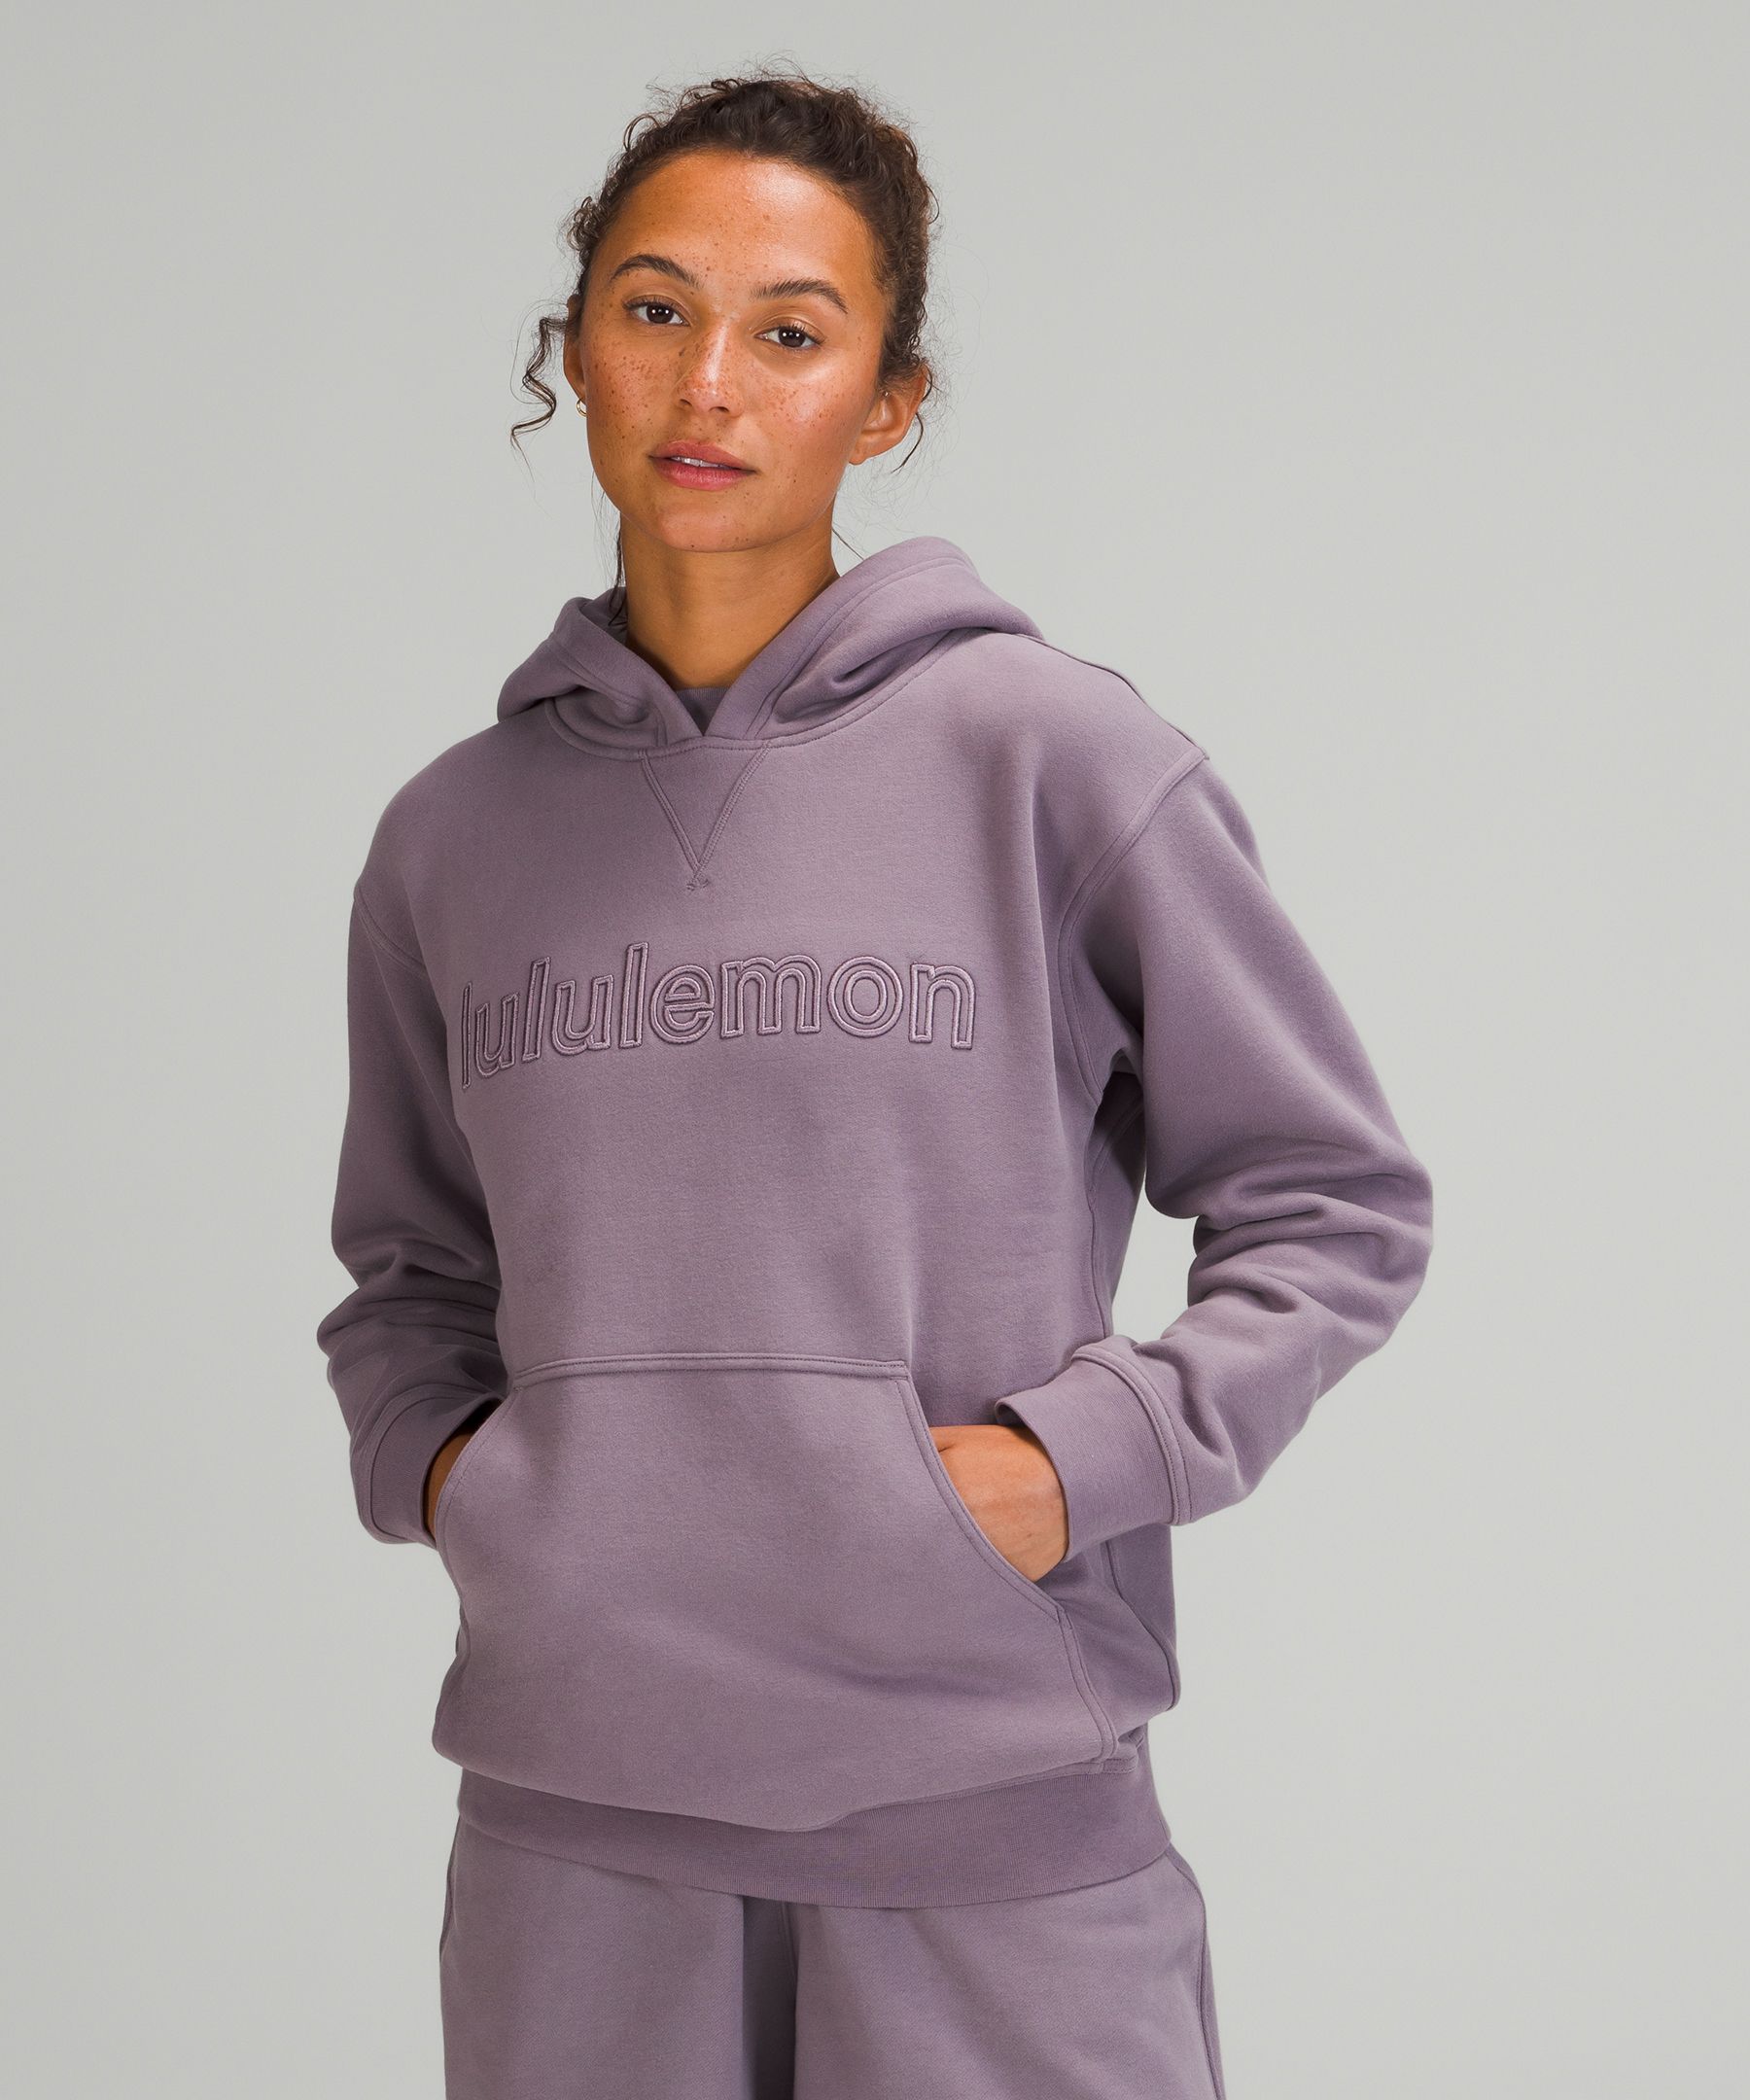 Lululemon All Yours Hoodie Graphic In Dusky Lavender